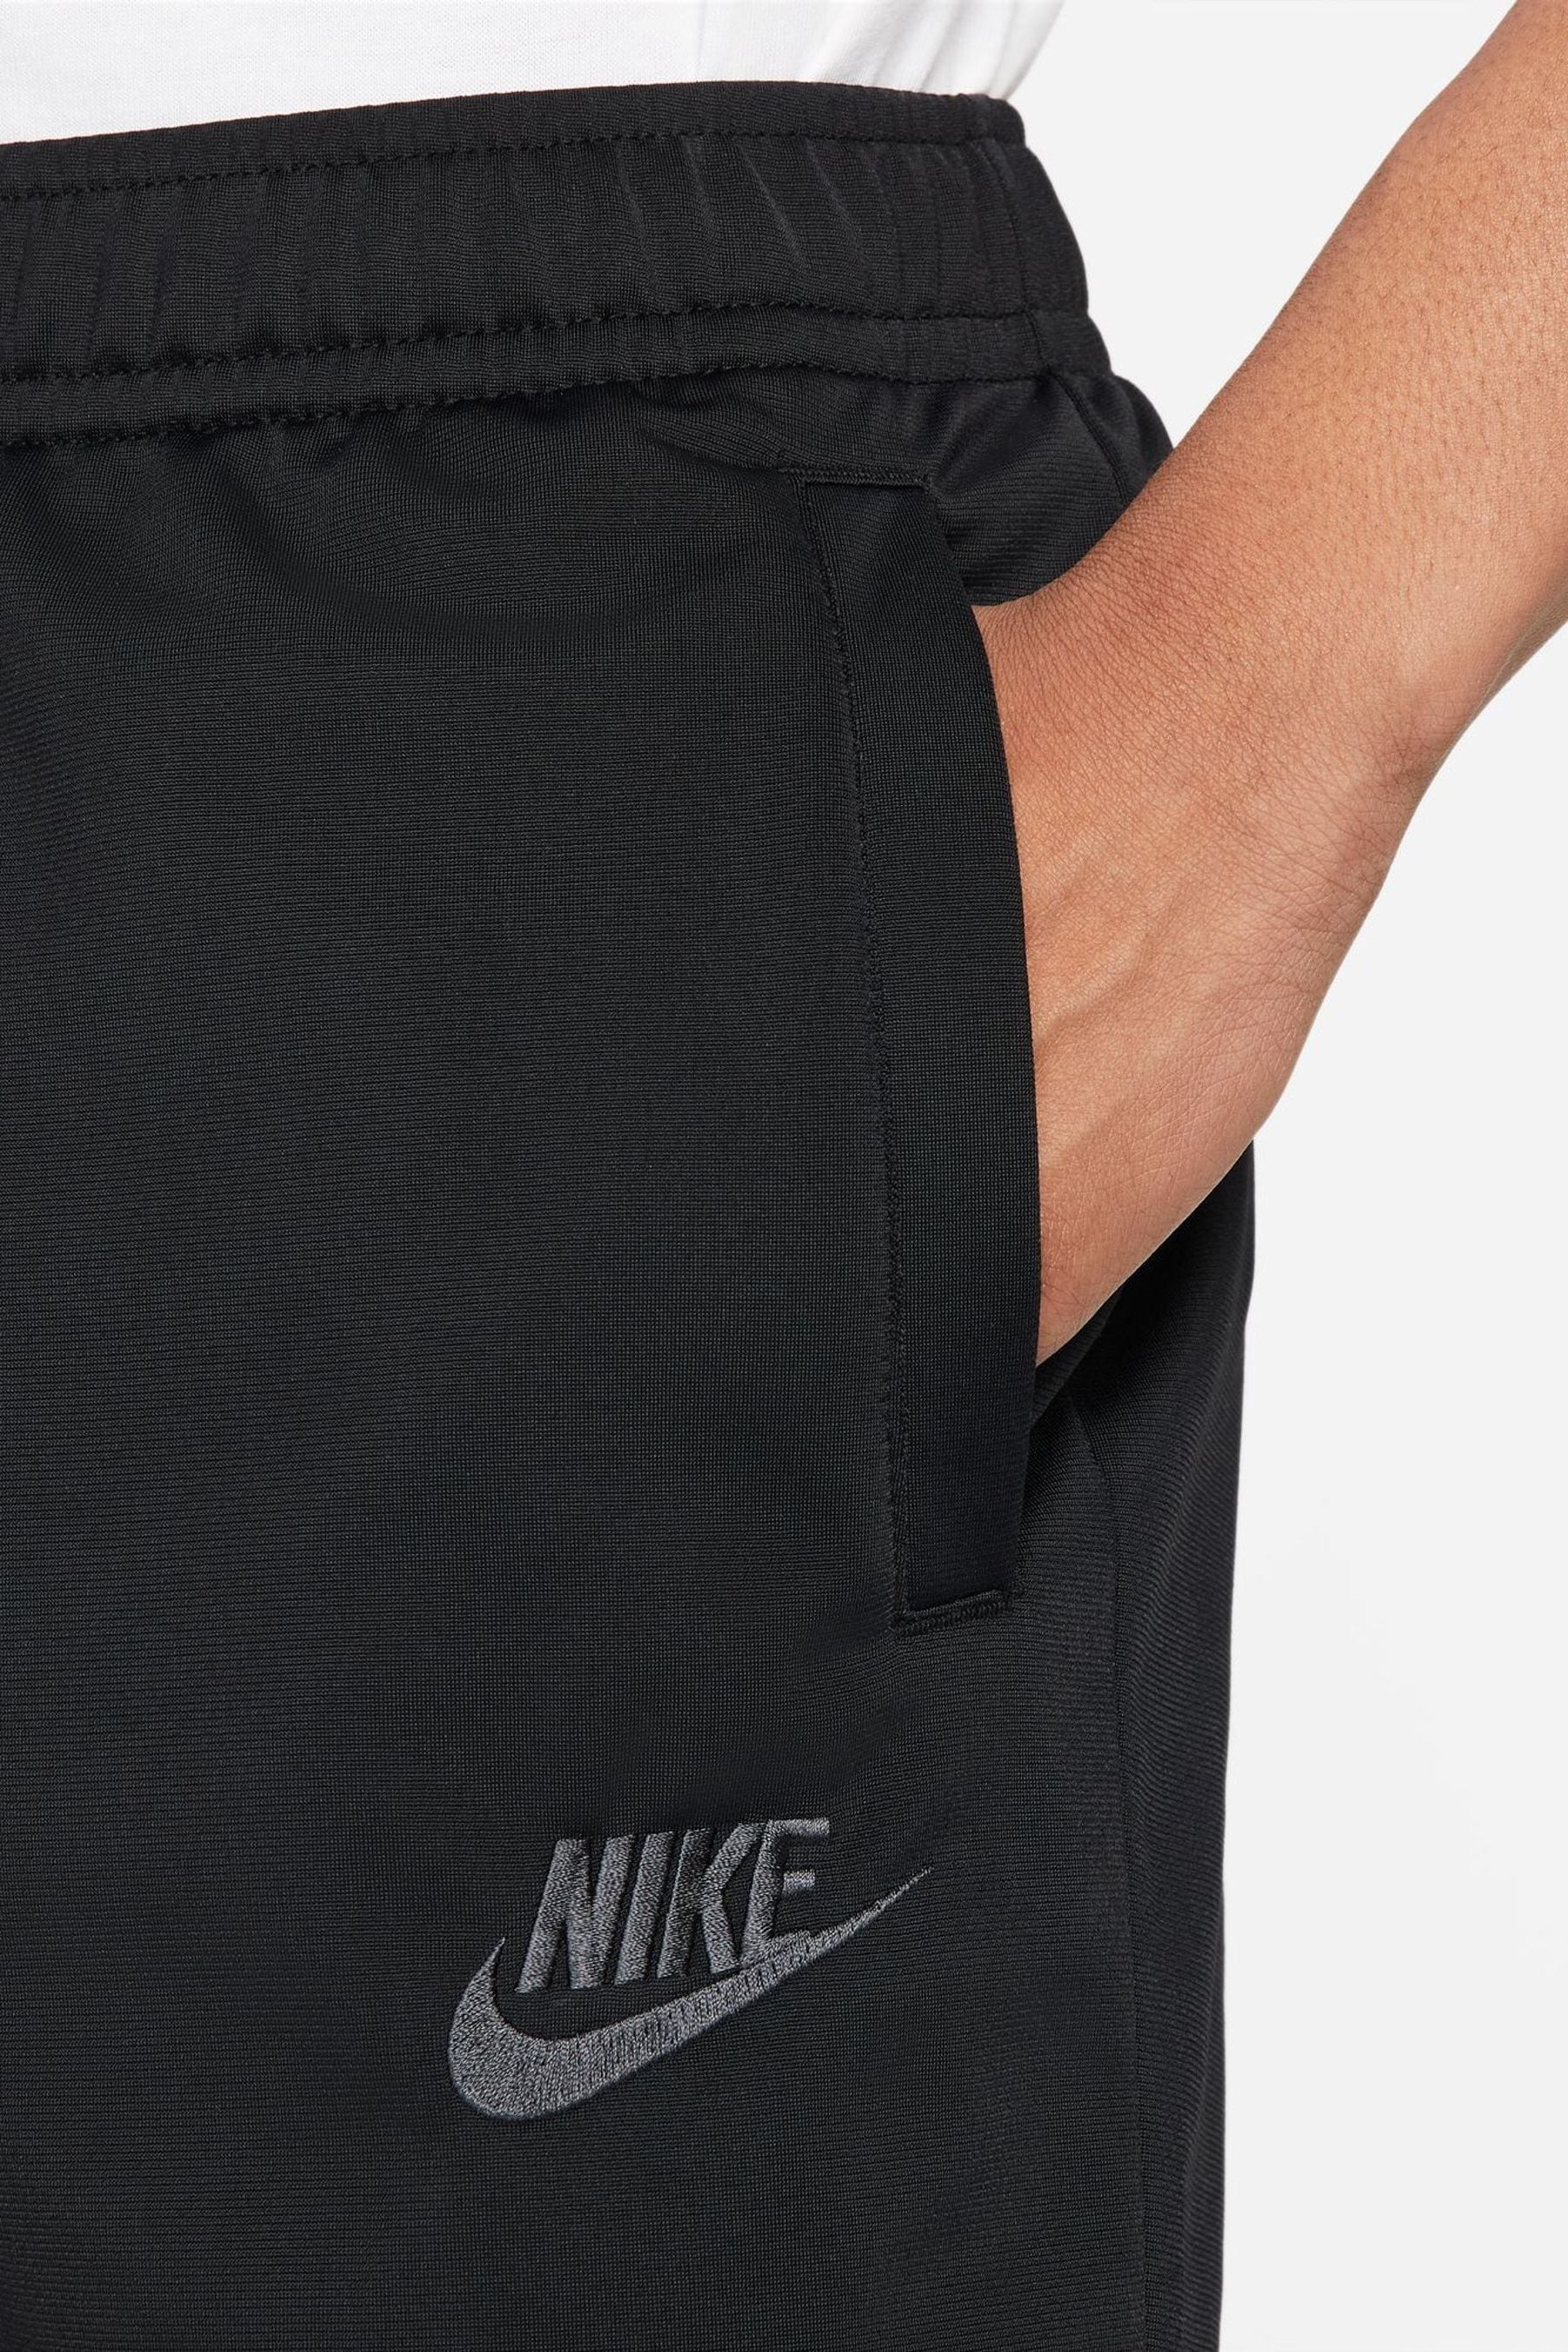 Buy Nike Black Sportswear Sport Essentials Poly Knit Track Suit from ...